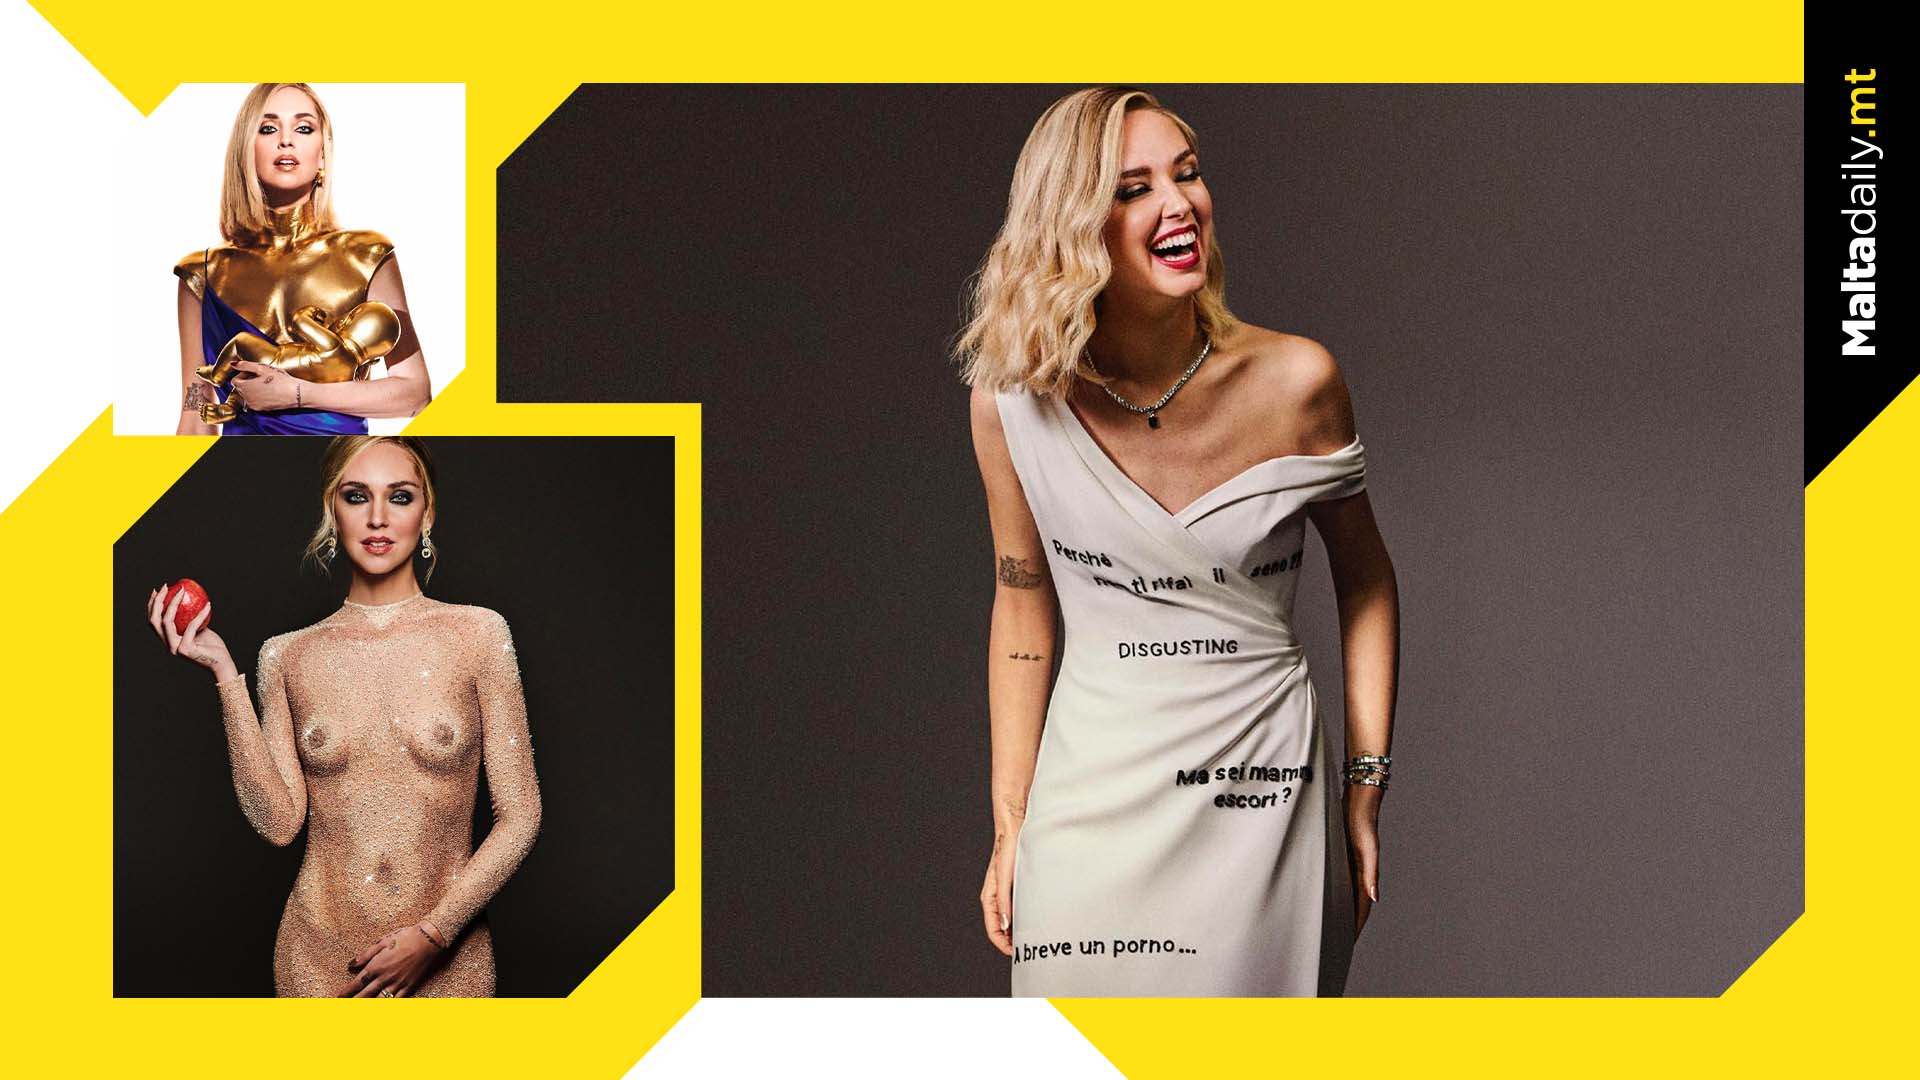 Italian influencer takes aim at patriarchy with 4 different gowns